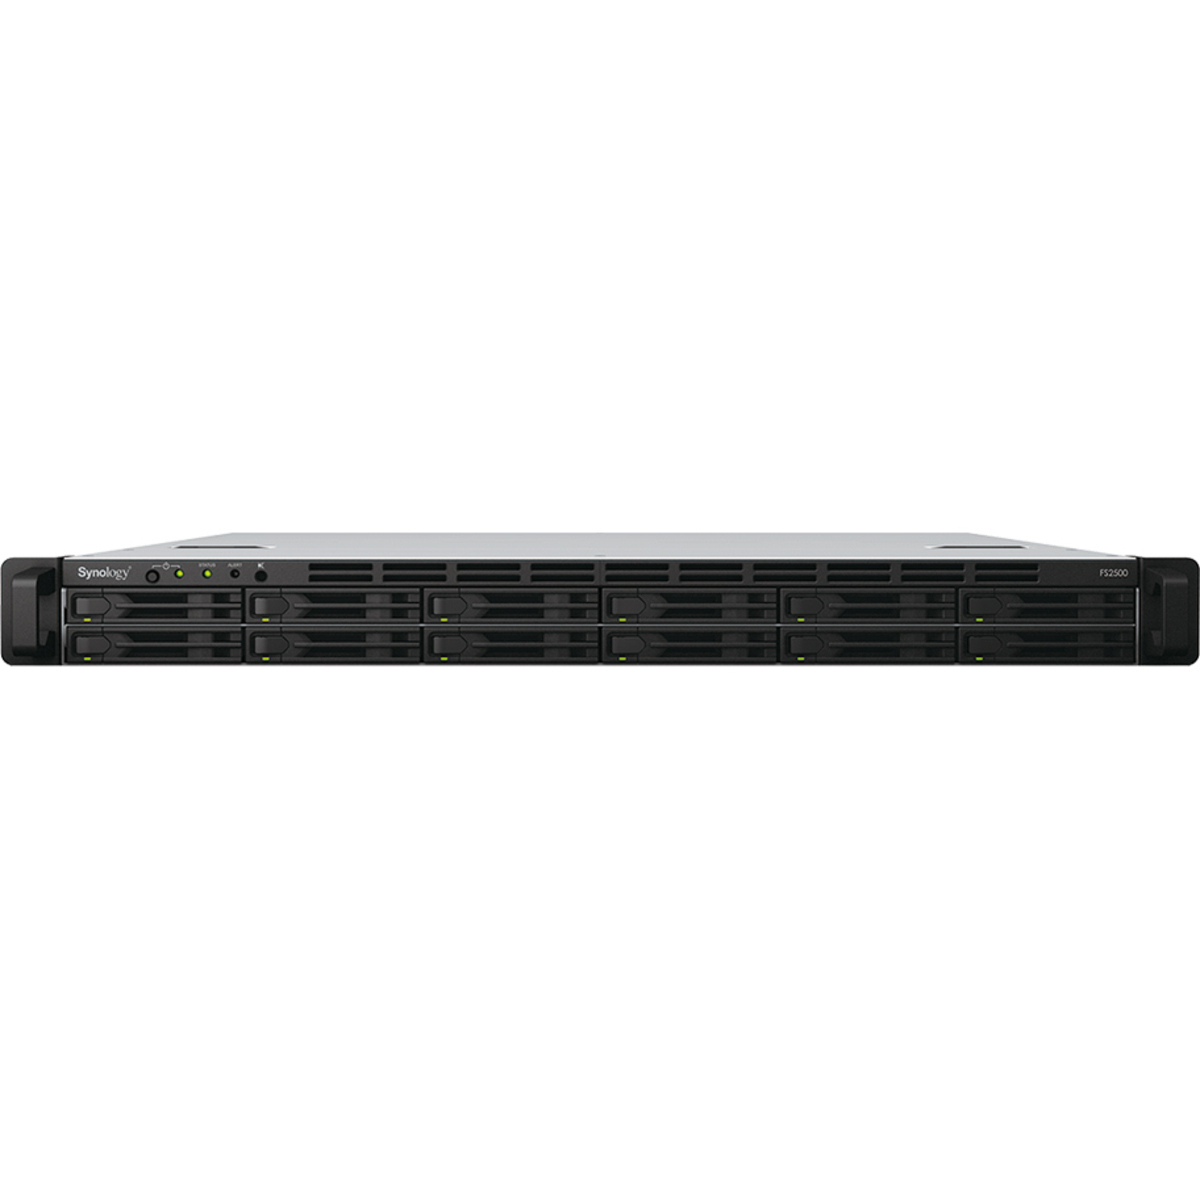 Synology FlashStation FS2500 49tb 12-Bay RackMount Large Business / Enterprise NAS - Network Attached Storage Device 7x7tb Synology SAT5210 Series SAT5210-7000G 2.5 530/500MB/s SATA 6Gb/s SSD ENTERPRISE Class Drives Installed - Burn-In Tested - FREE RAM UPGRADE FlashStation FS2500